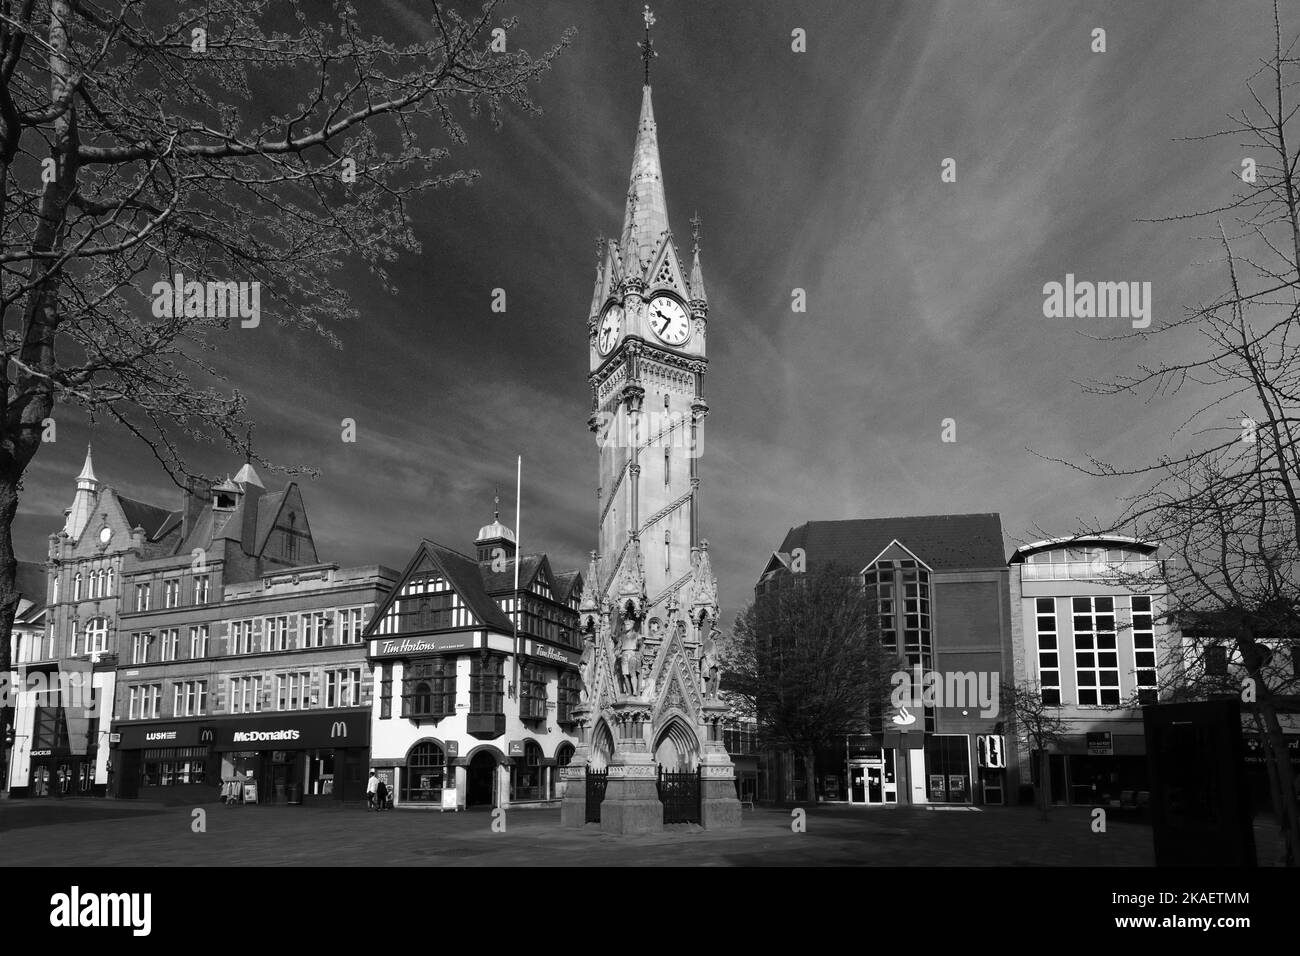 The Haymarket Memorial Clock Tower, Leicester City, Leicestershire, England; UK Stock Photo